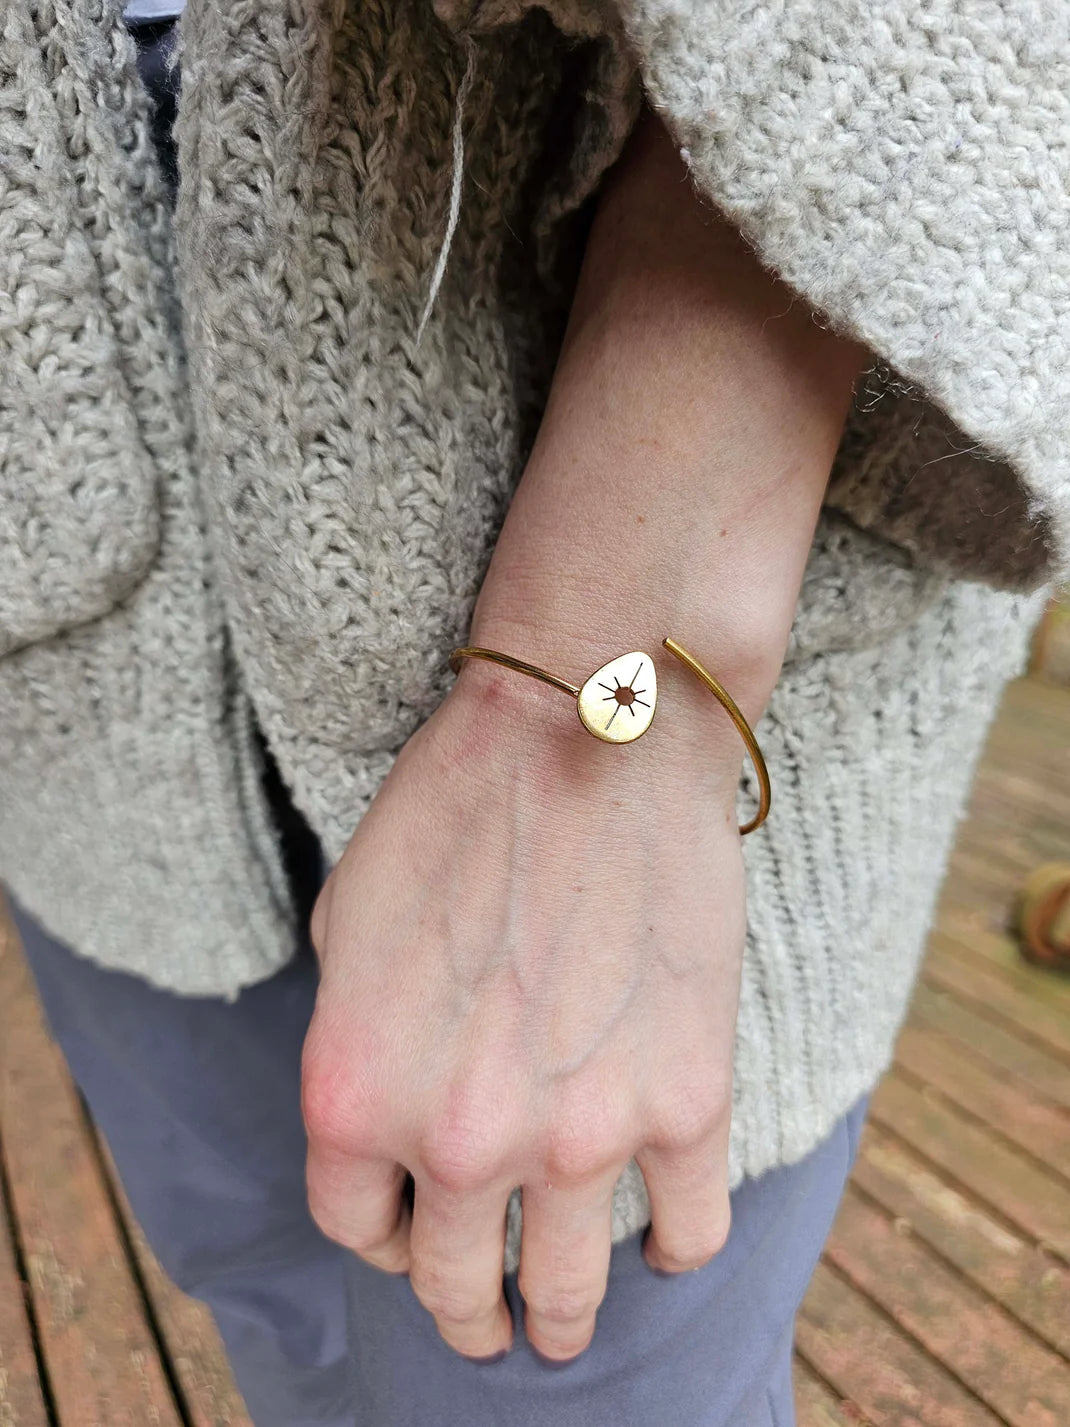 a person wearing a gold wrap bracelet with a sun symbol.